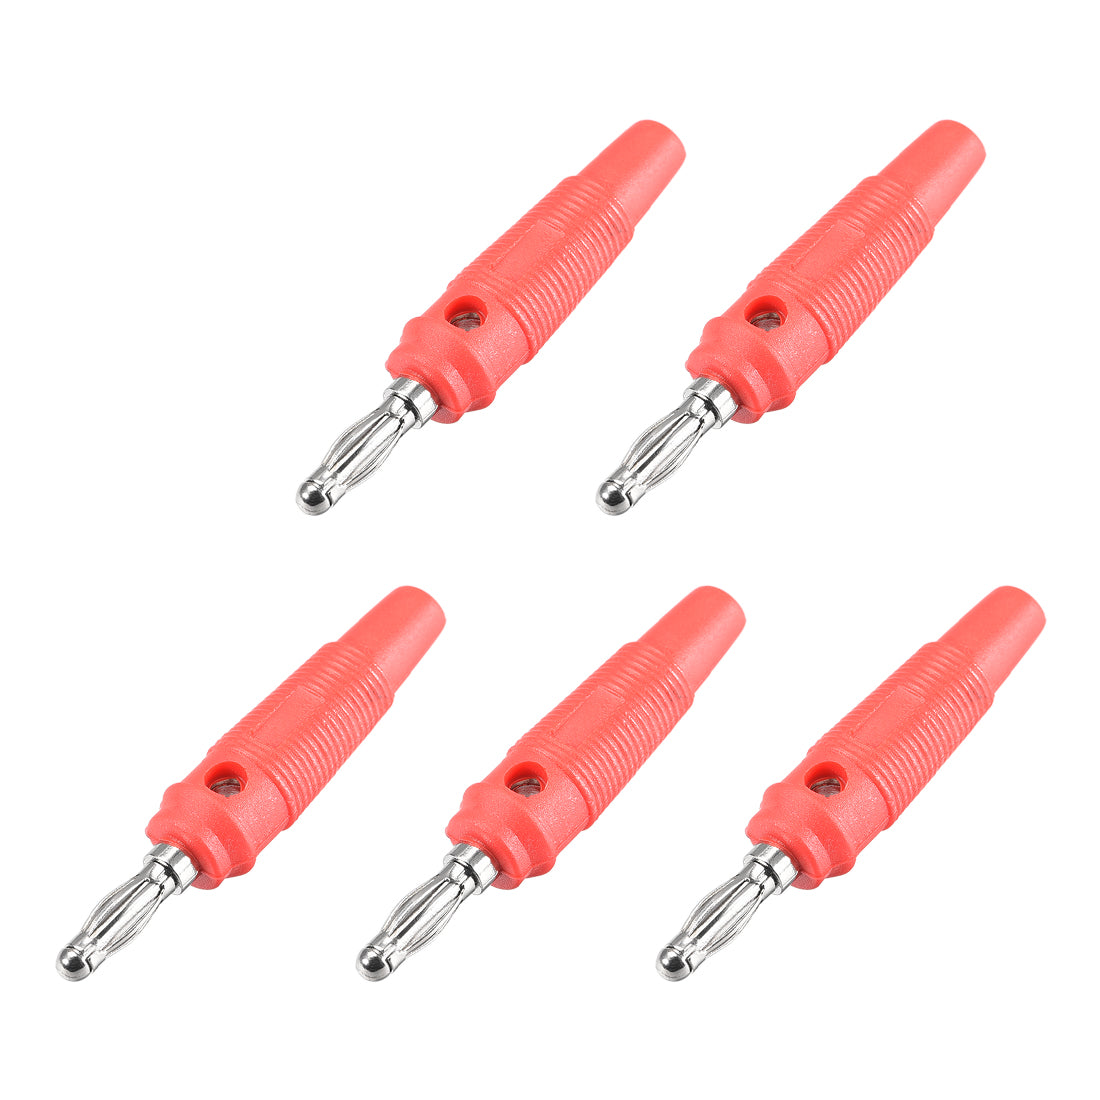 uxcell Uxcell 4mm Banana Speaker Plug Screws Cable Plugs Connectors Red 10A Jack Connector 5pcs